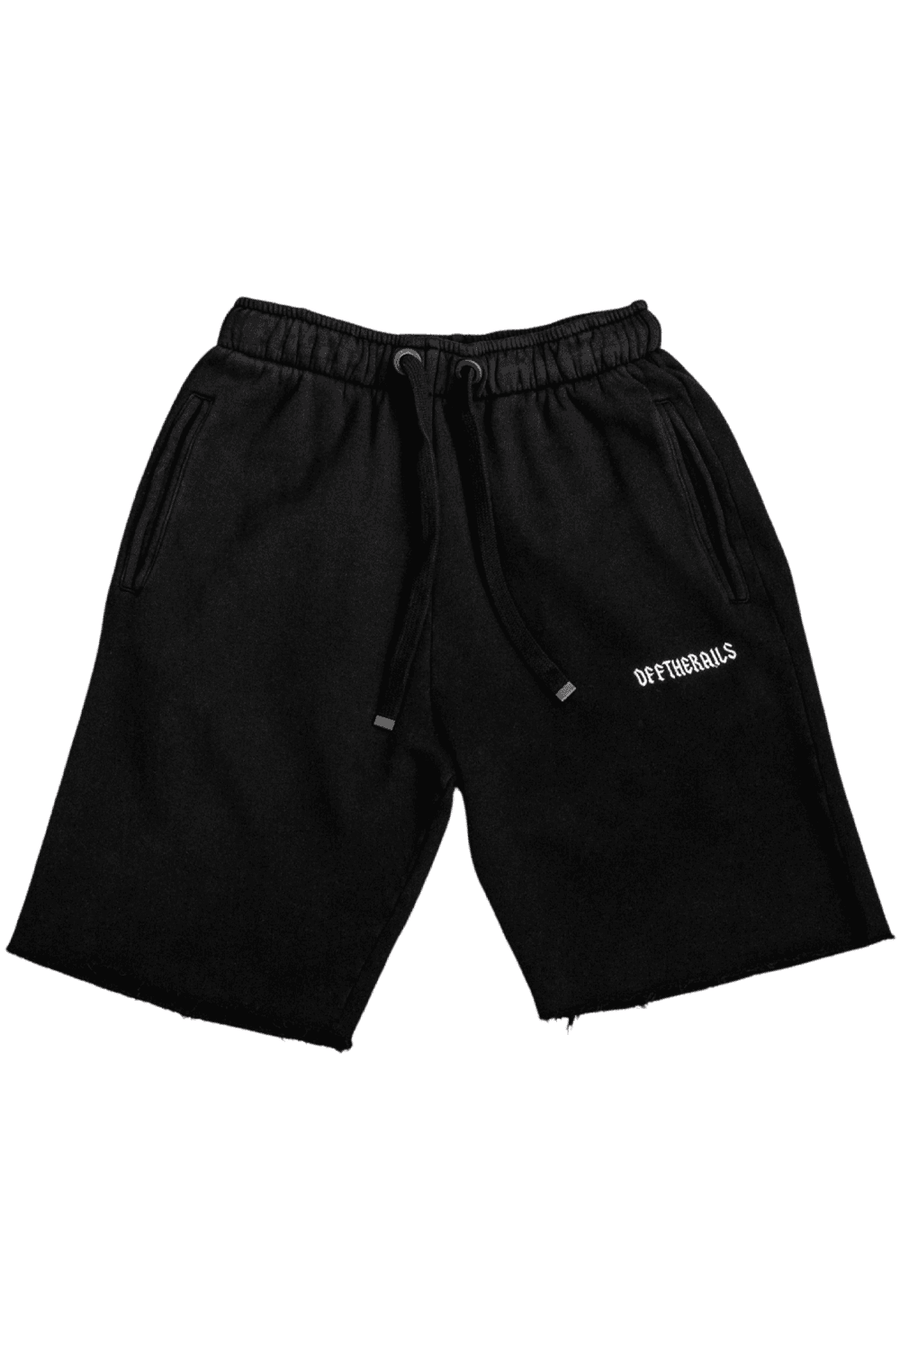 Buy the Off The Rails Heavy Metal Shorts in Black at Intro. Spend £50 for free UK delivery. Official stockists. We ship worldwide.